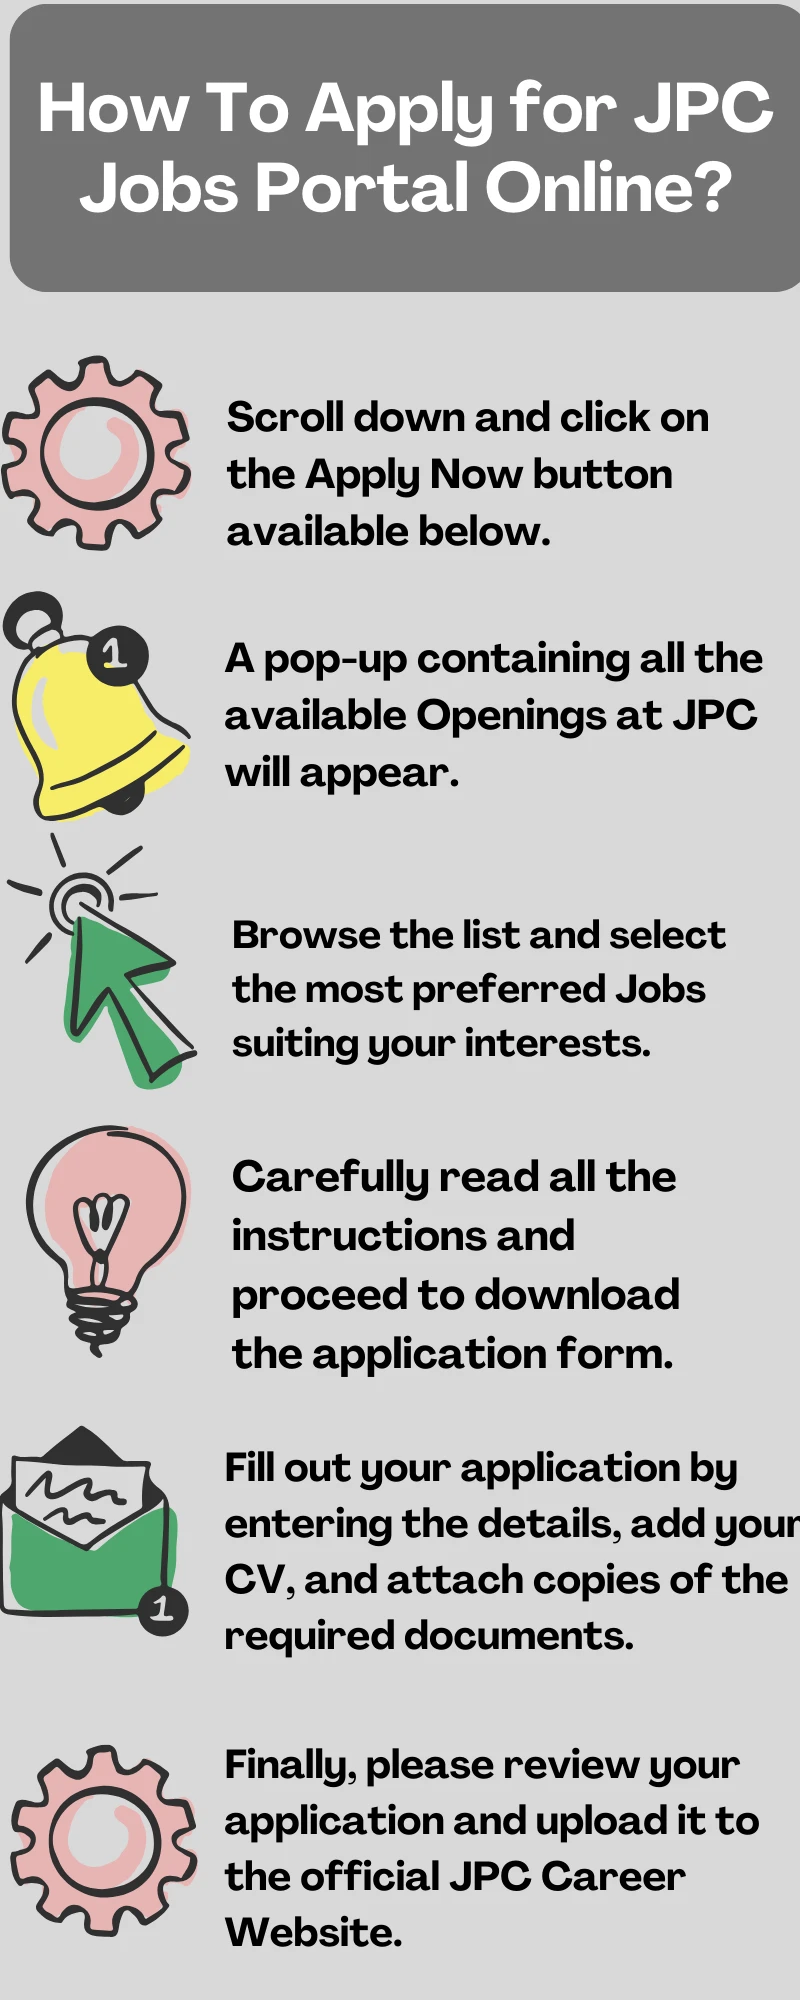 How To Apply for JPC Jobs Portal Online?